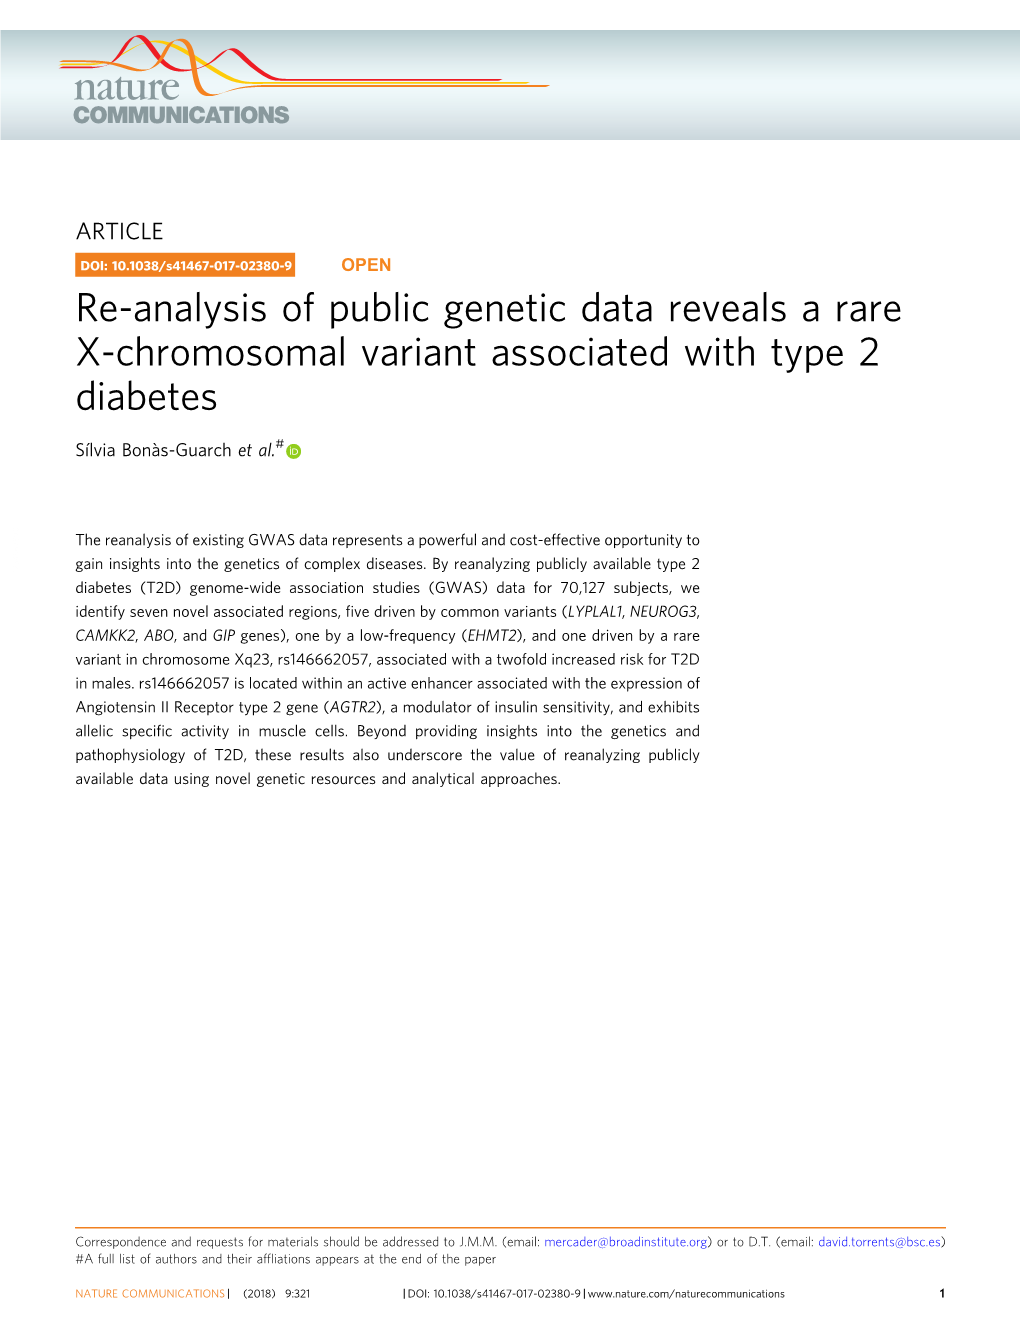 Re-Analysis of Public Genetic Data Reveals a Rare X-Chromosomal Variant Associated with Type 2 Diabetes